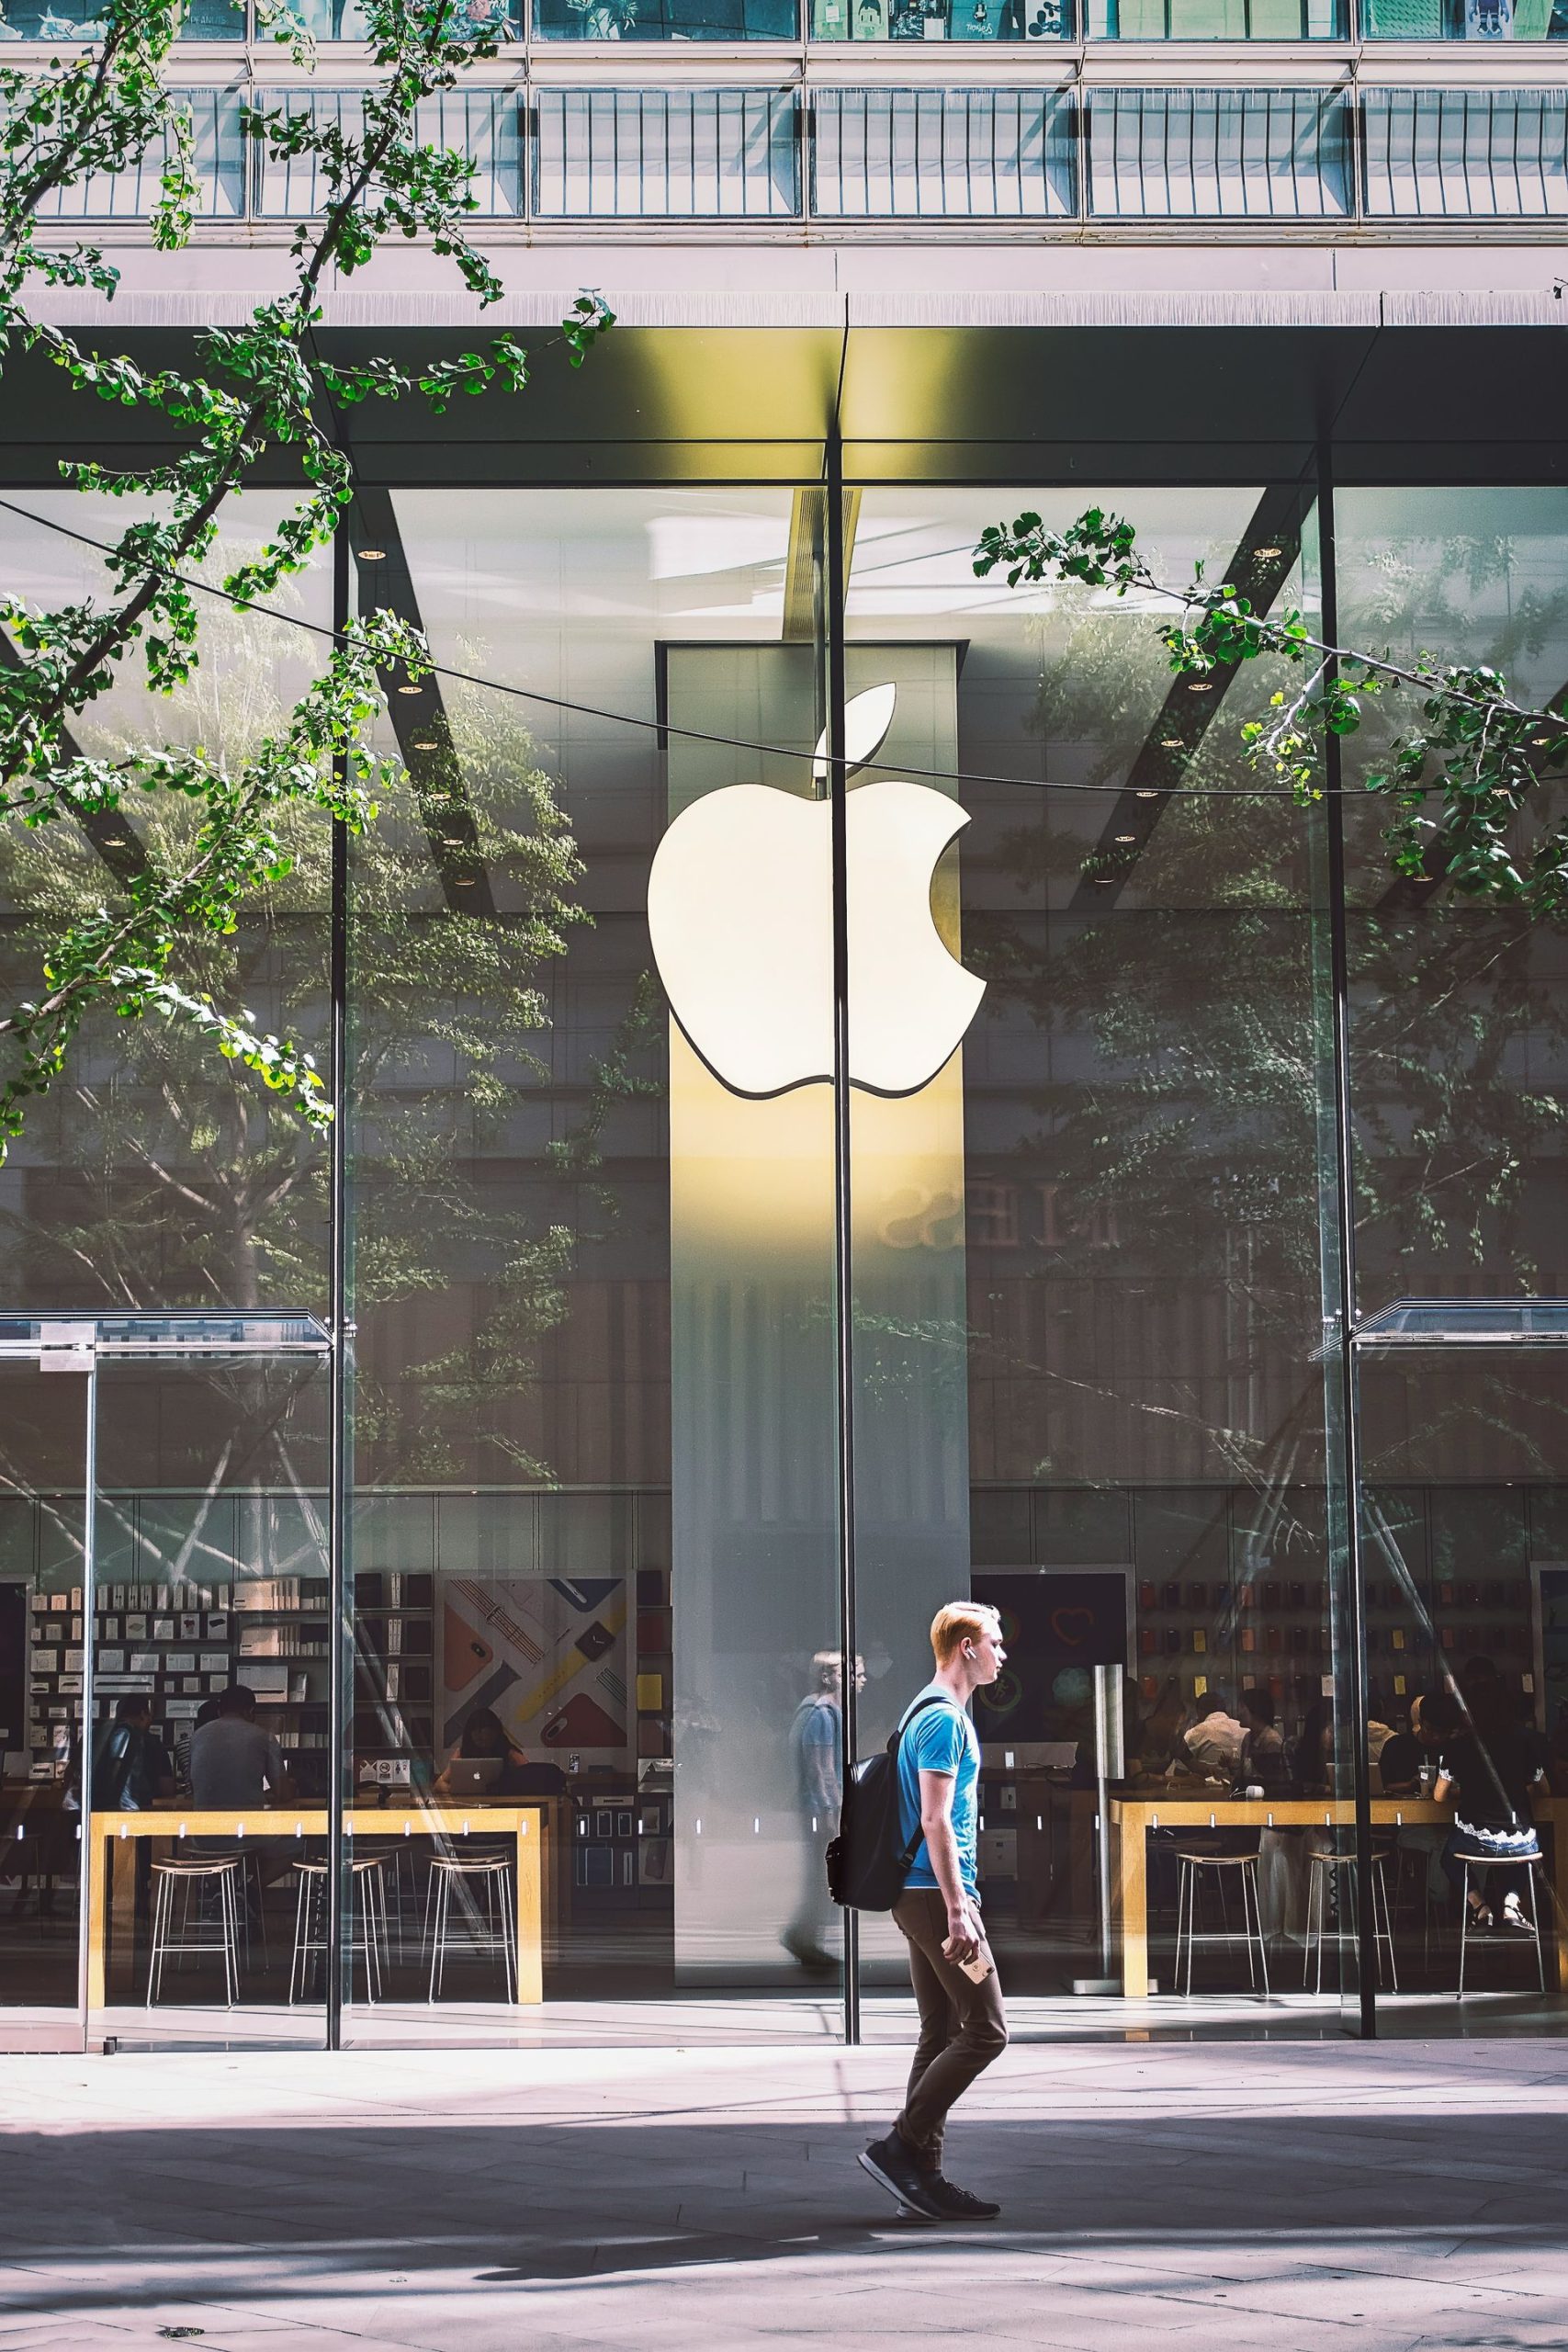 Apple class action lawsuit: Everything we know so far